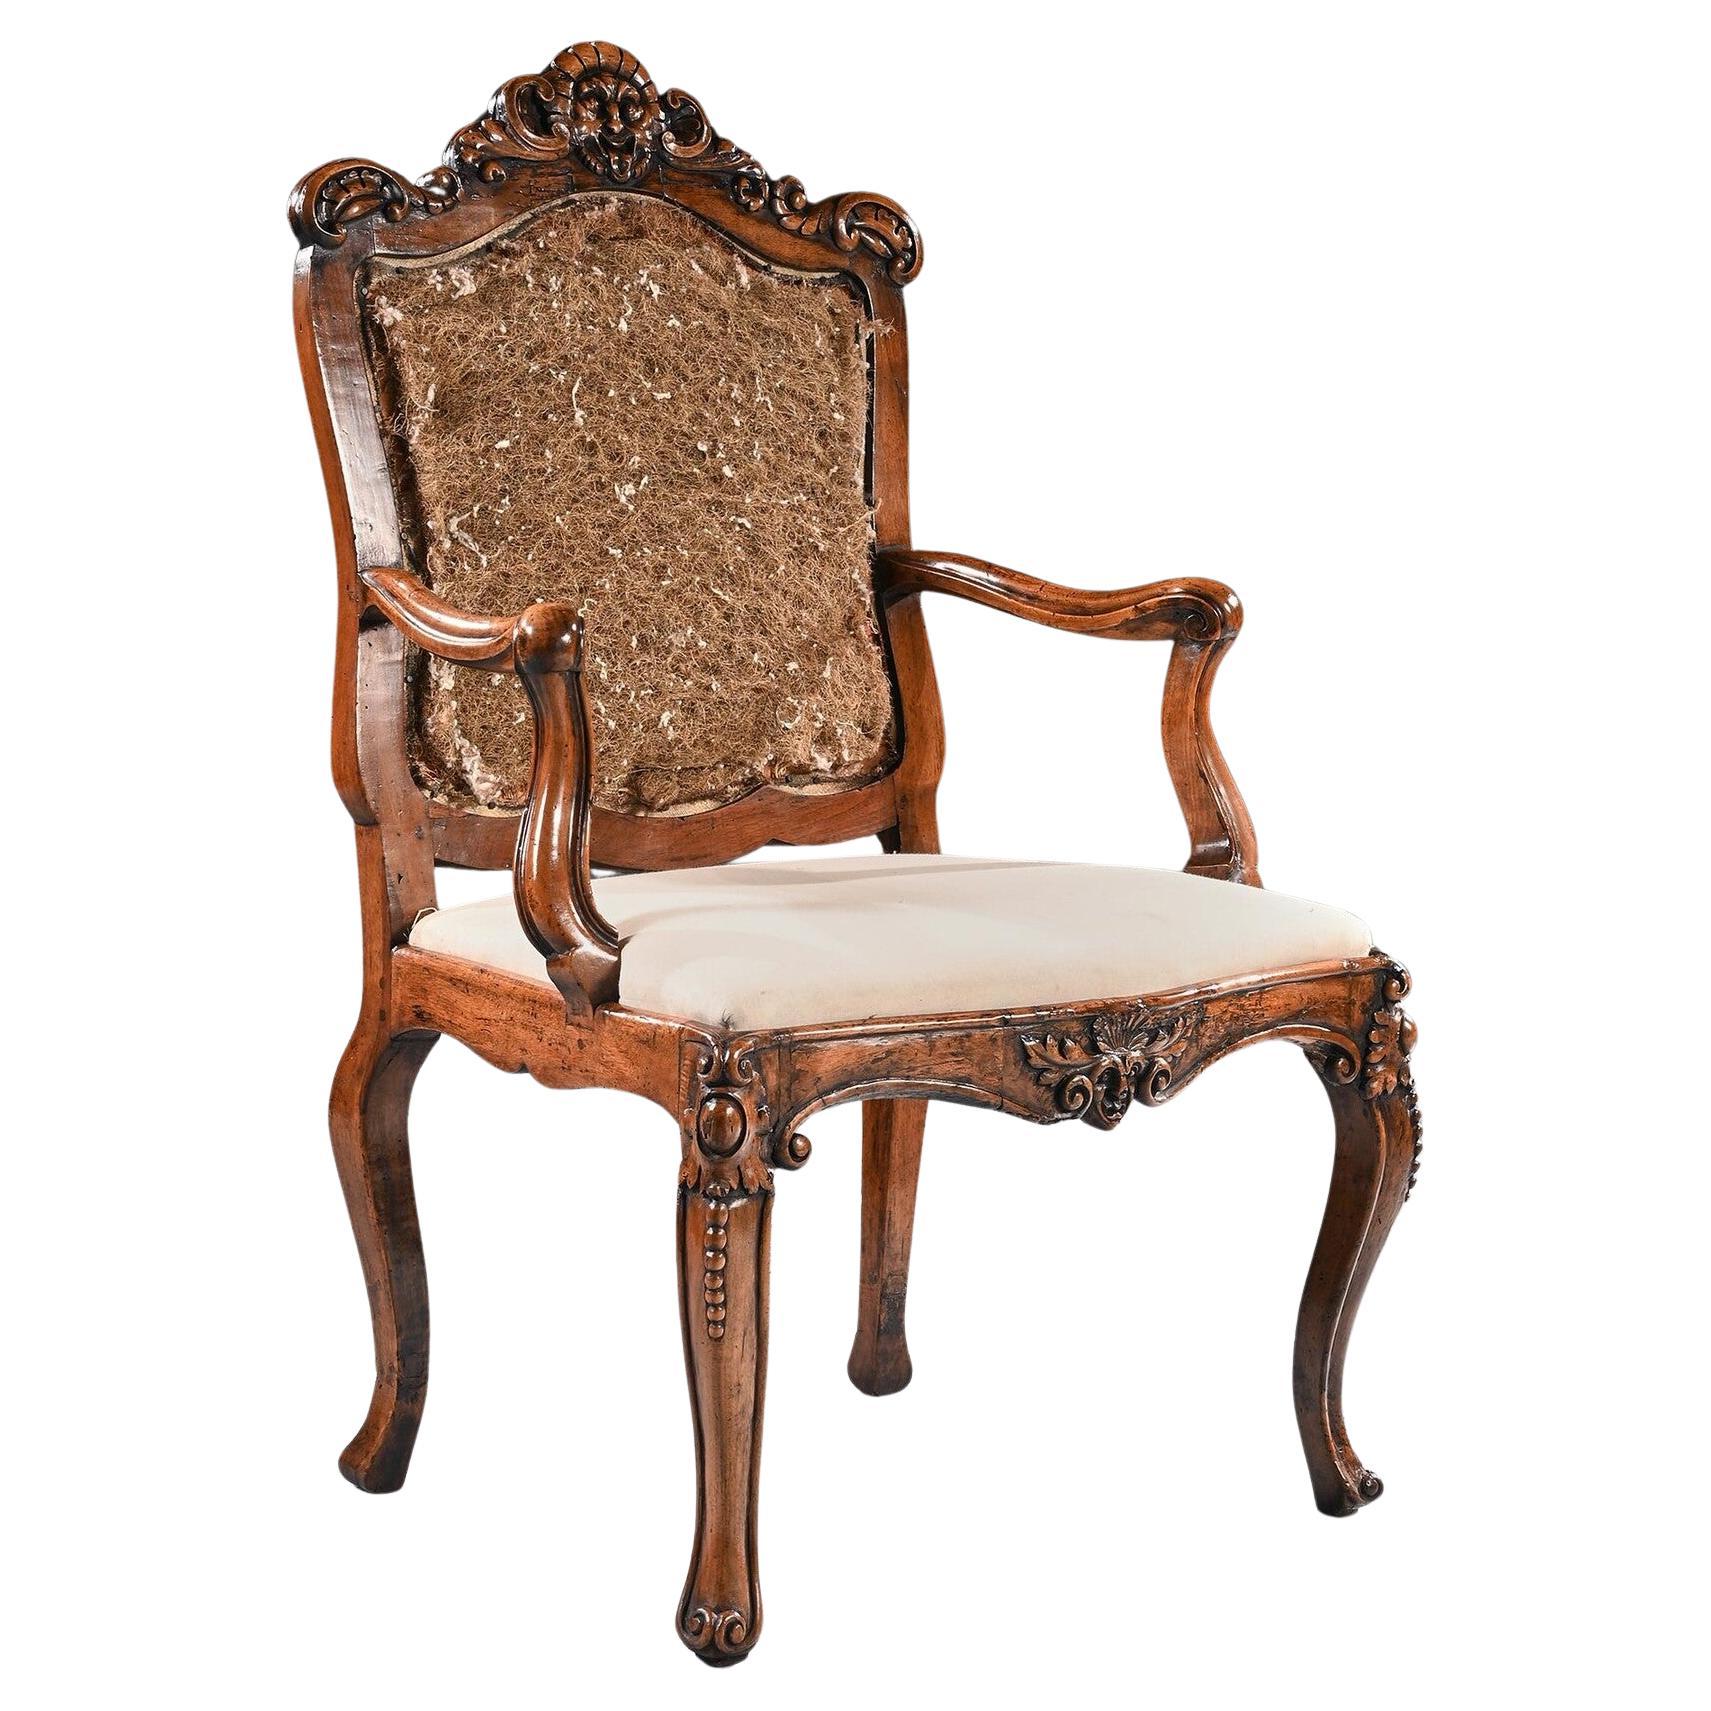 Mid 18th Century Italian Rococo Armchair in Walnut With Extravagantly Carved